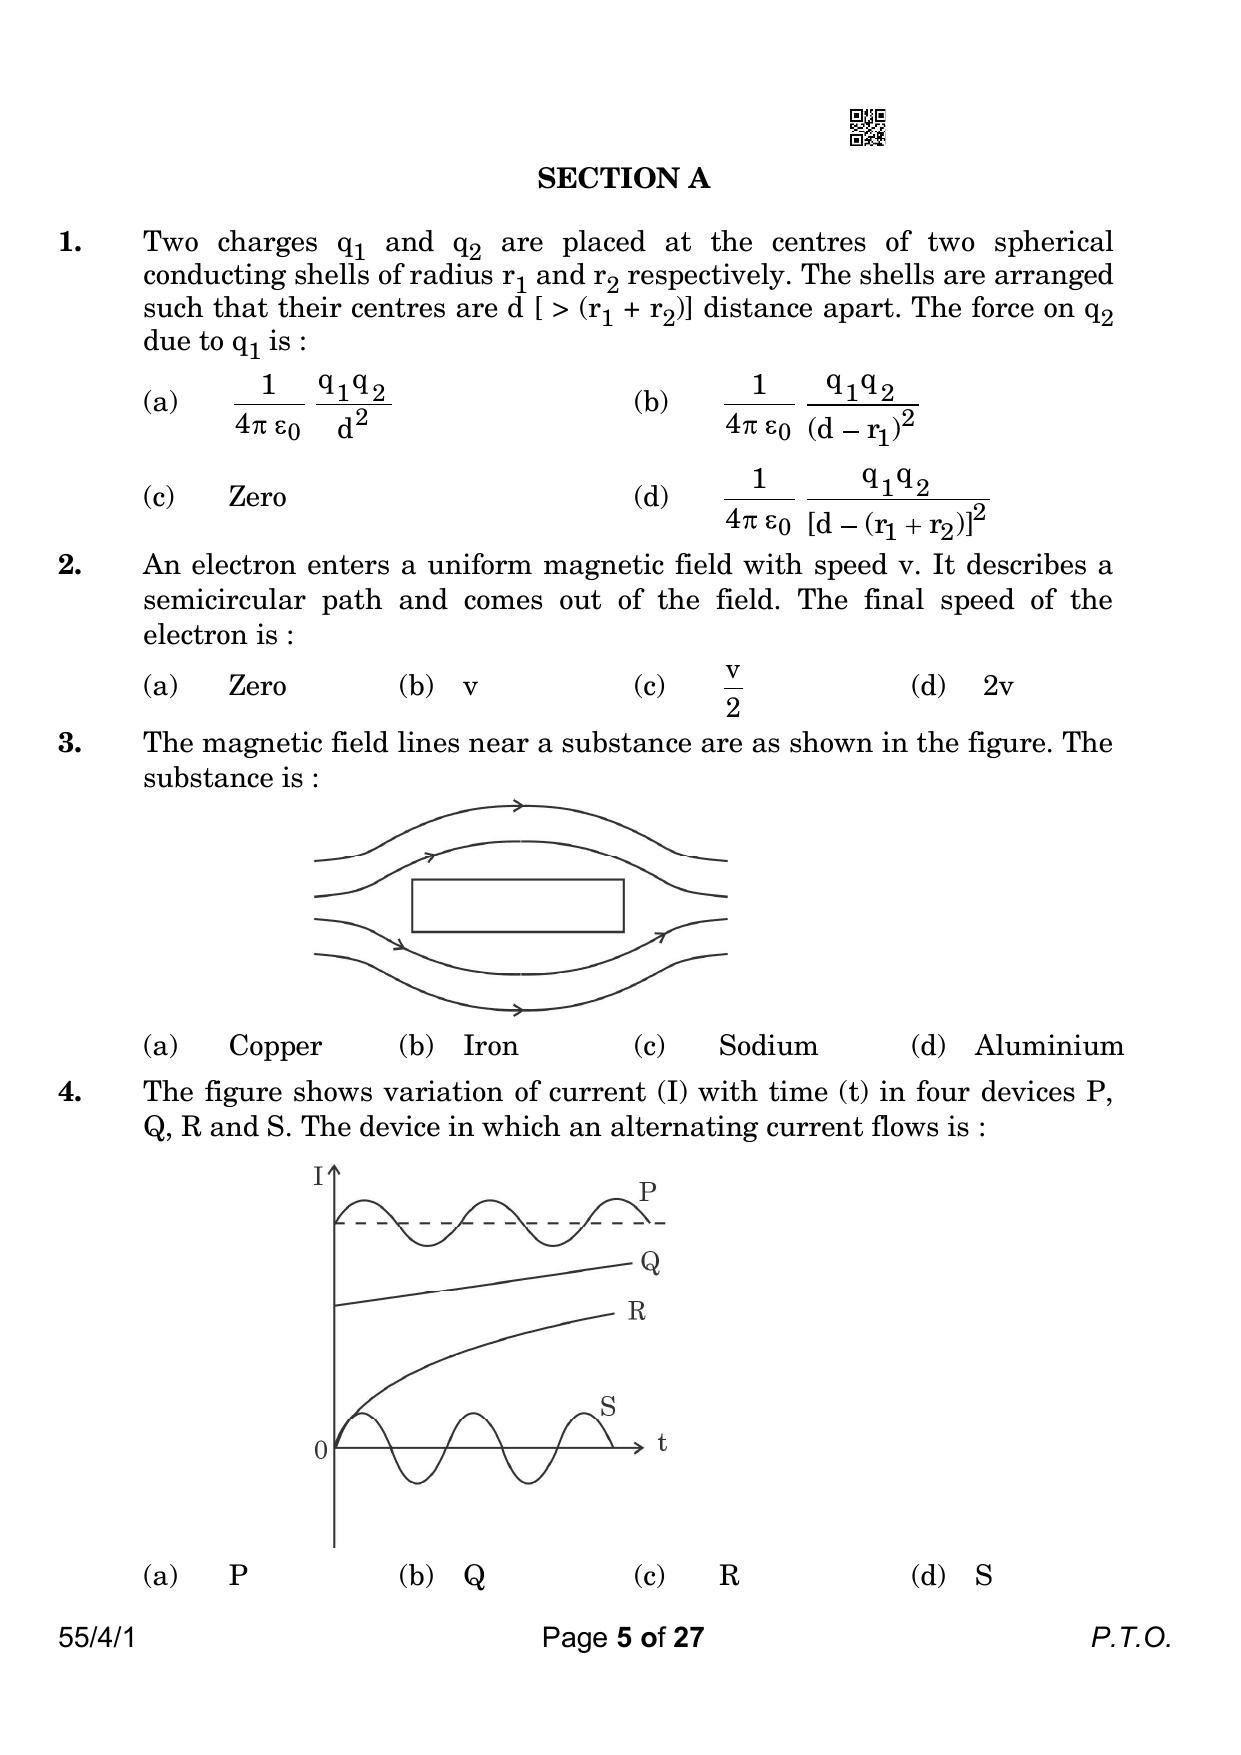 CBSE Class 12 55-4-1 Physics 2023 Question Paper - Page 5